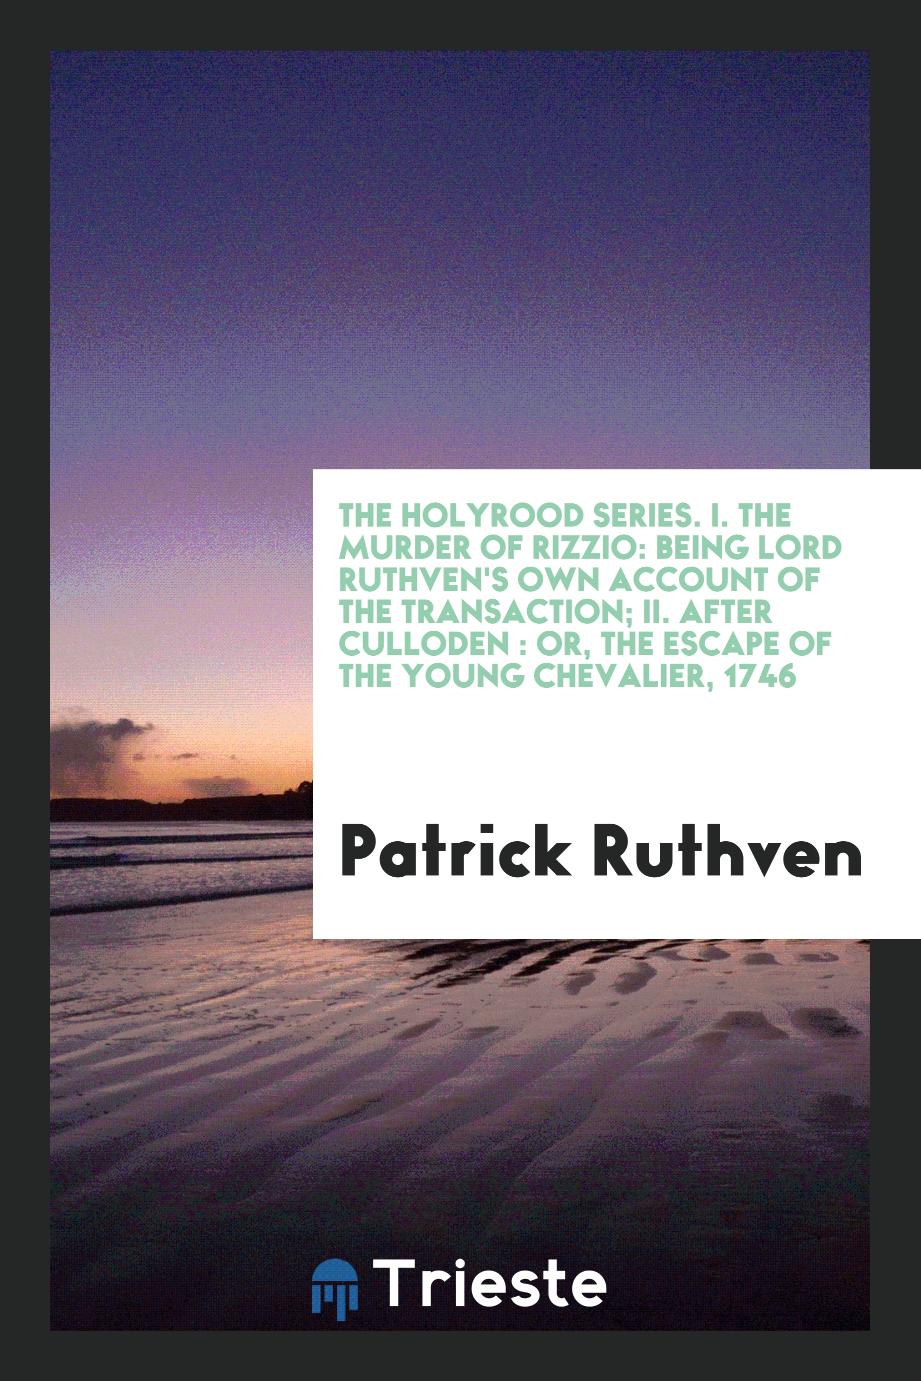 The Holyrood series. I. The murder of Rizzio: being Lord Ruthven's own account of the transaction; II. After Culloden : or, The escape of the young chevalier, 1746